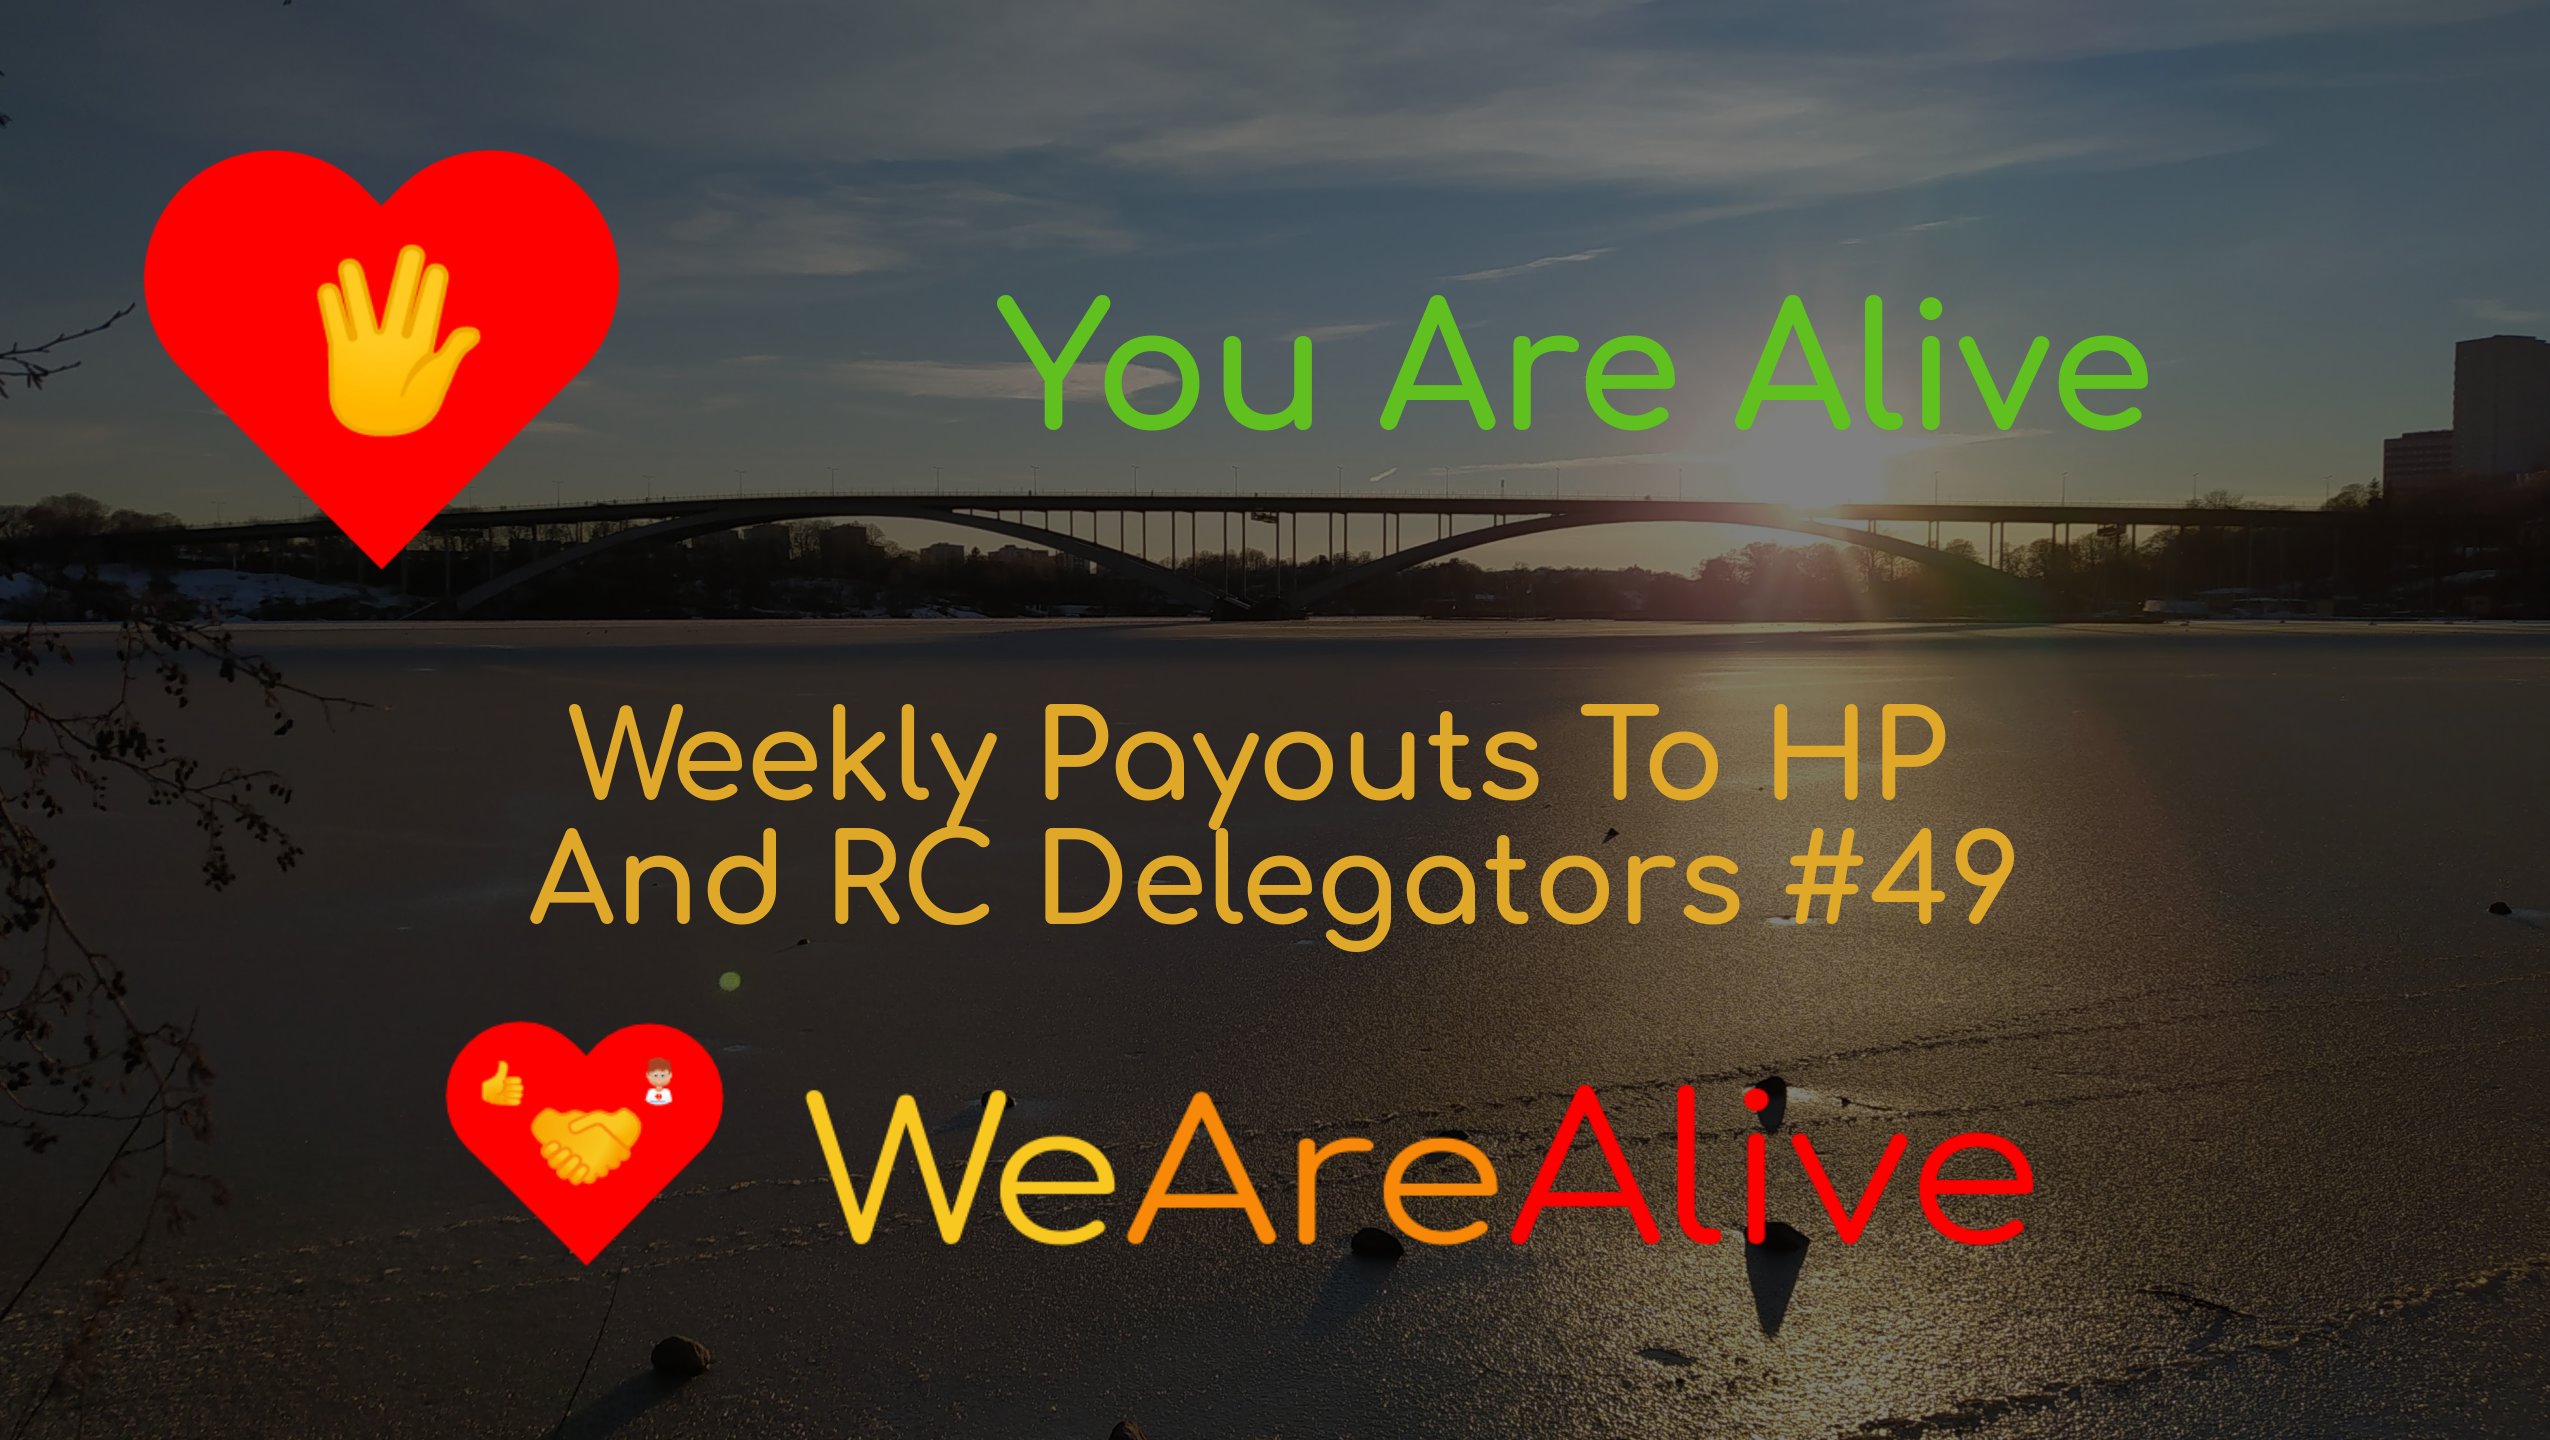 @youarealive/you-are-alive-weekly-payouts-to-hp-and-rc-delegators-49